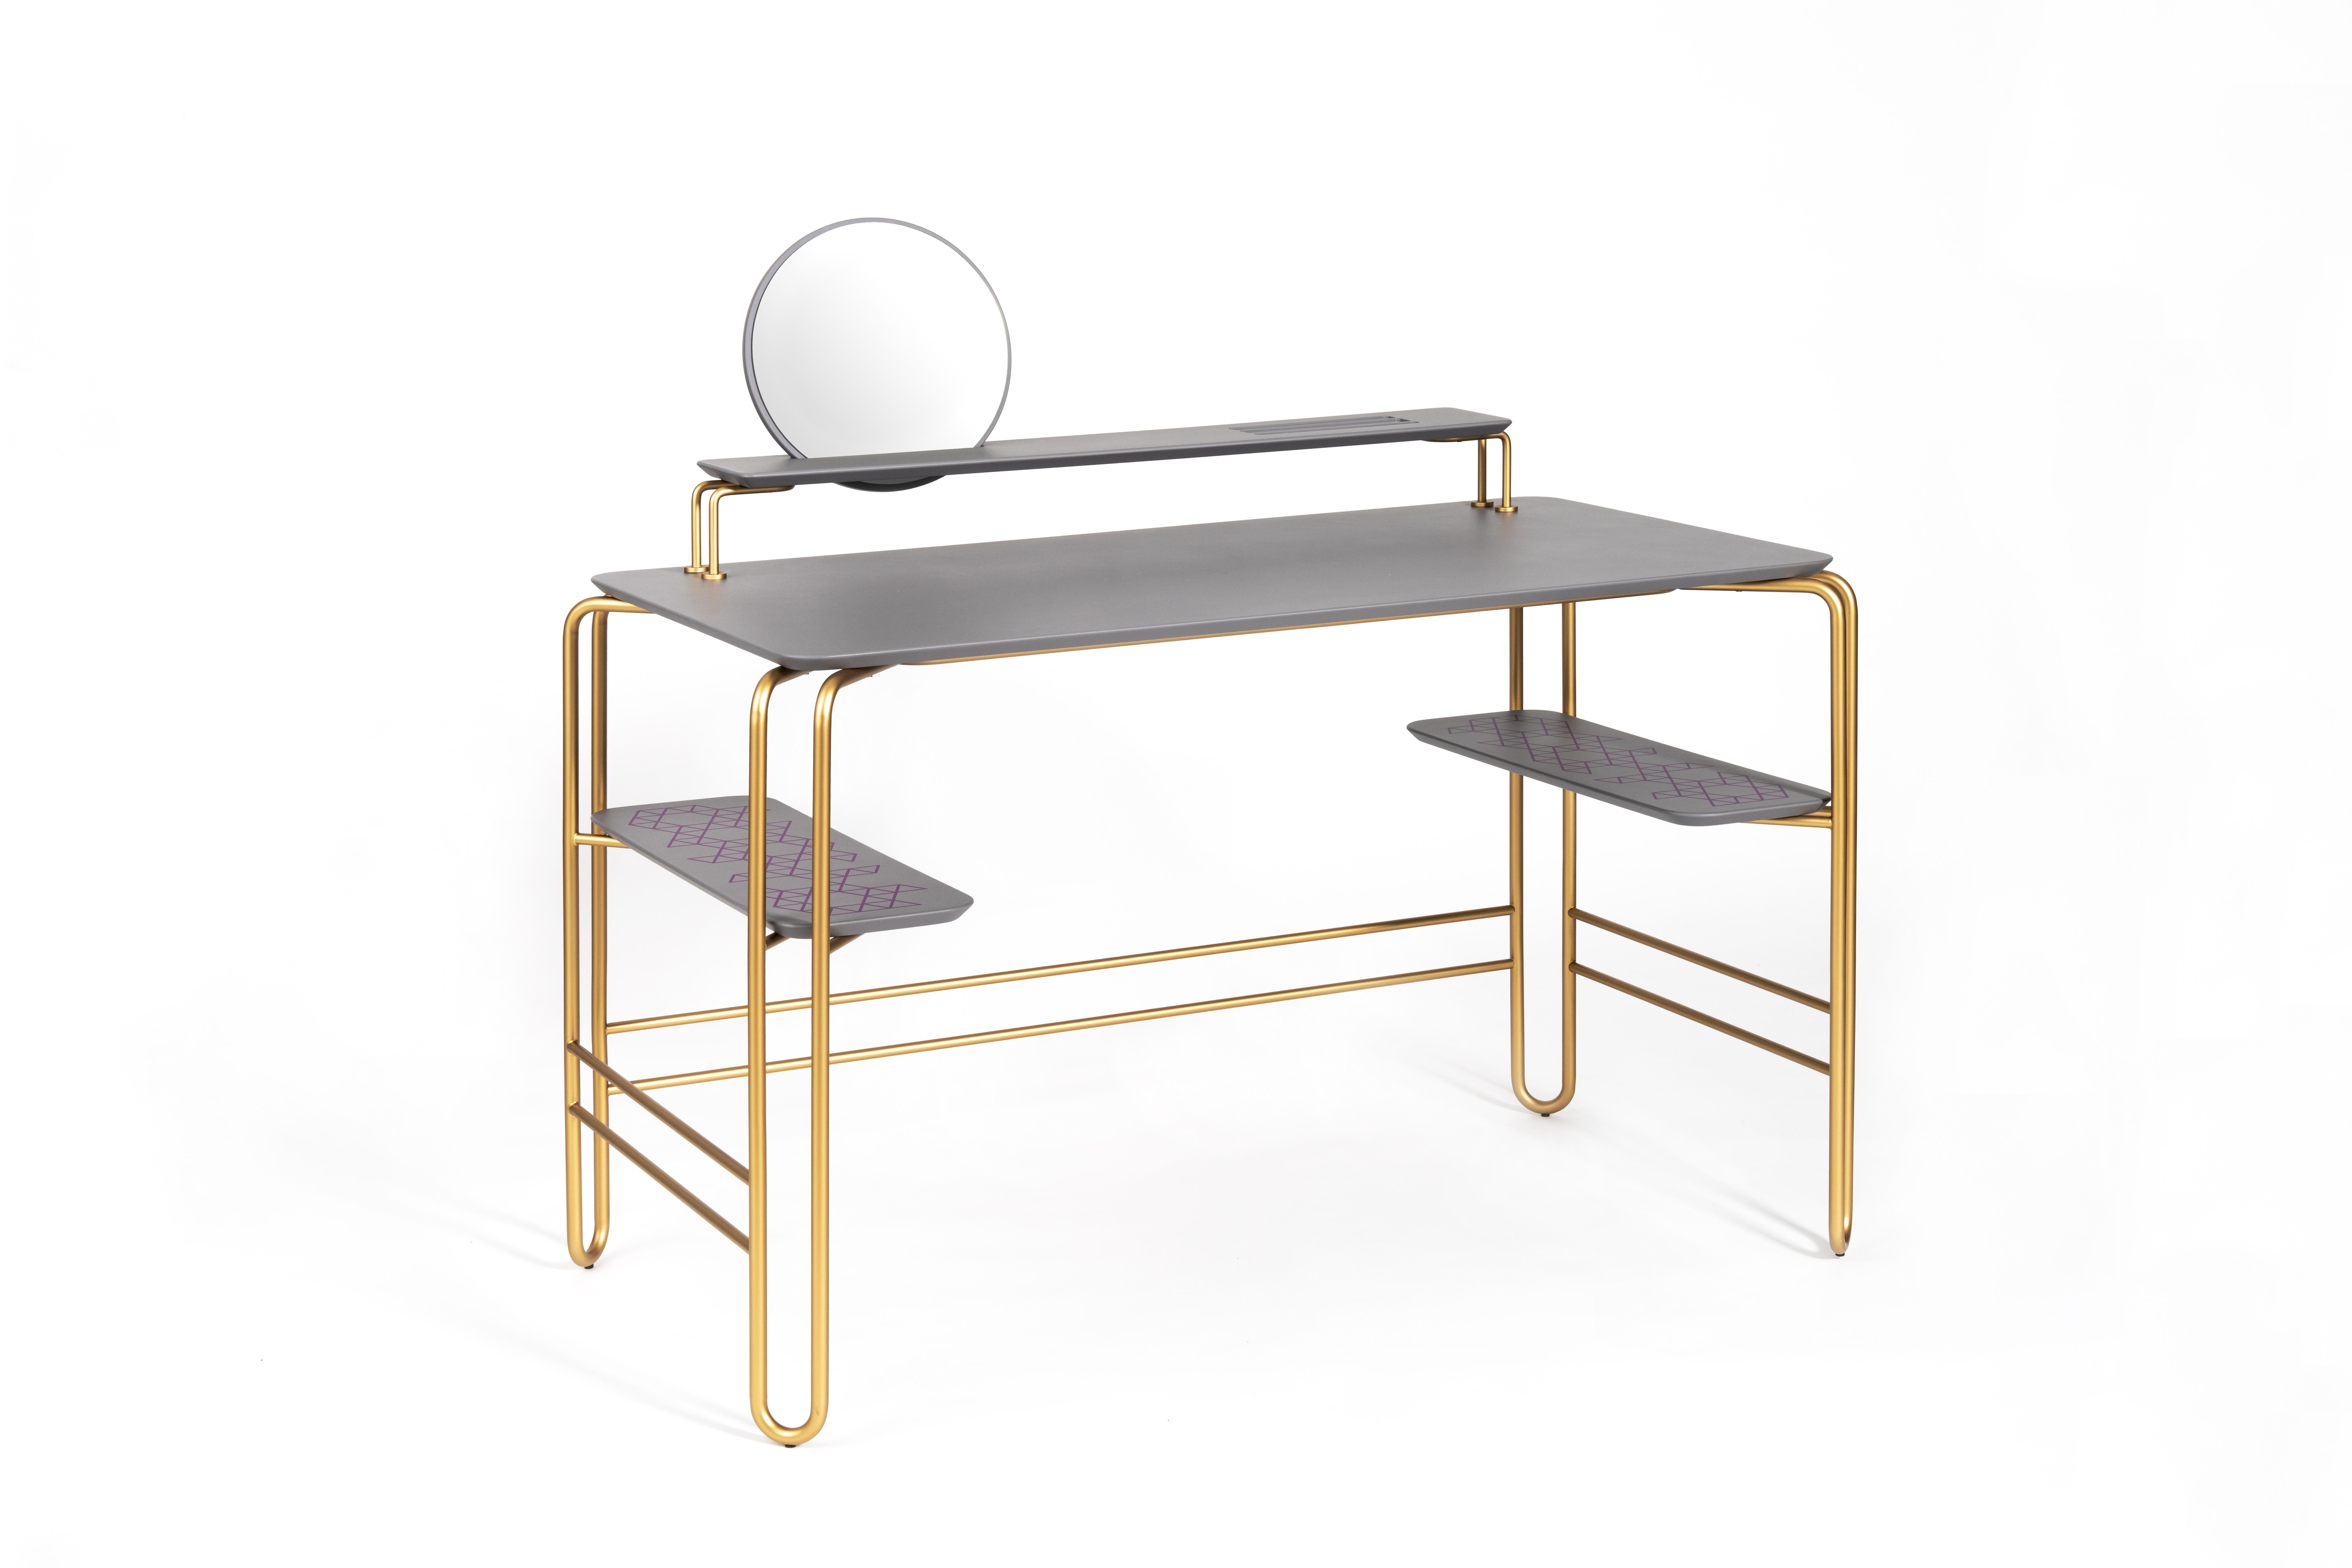 Grimilde console table by Mentemano
Dimensions: w 120 x d 65 x d 88 cm
Materials: Steel, Wood, Mirror 
Other colors available.

Console desk made of bended coated steel defined by clear and minimal lines with lacquered wood shelves. The two